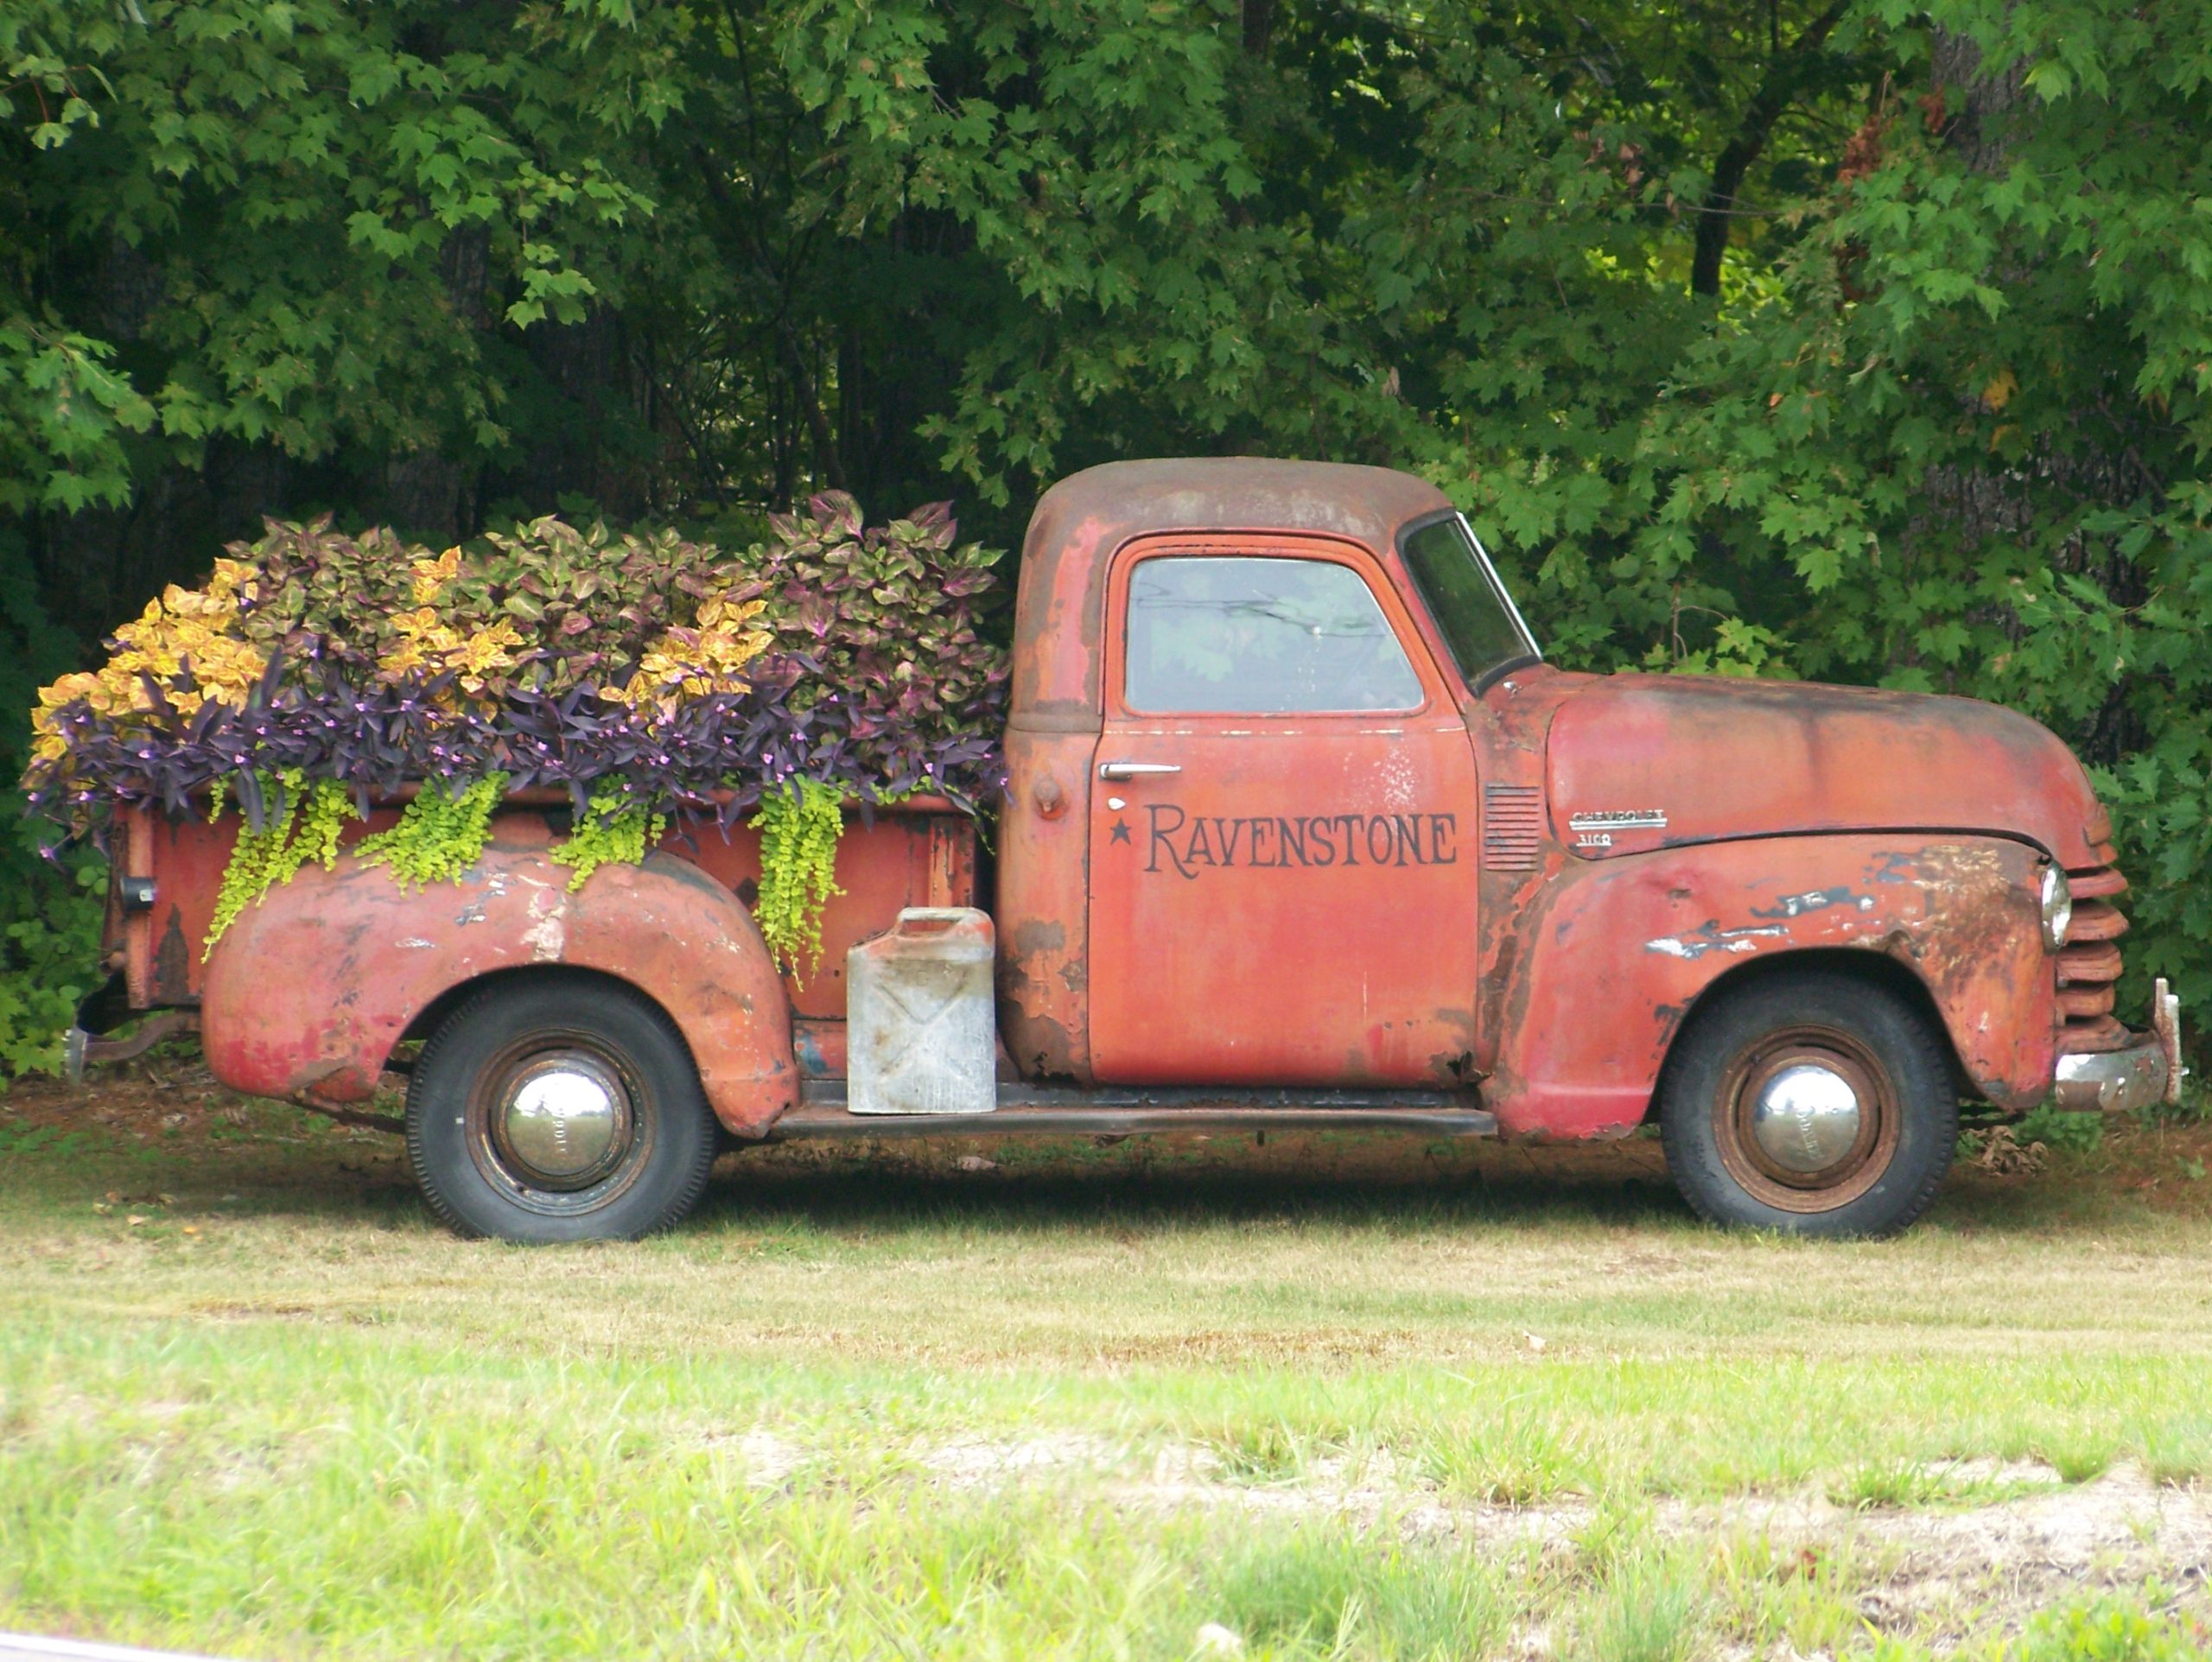 Antique Truck With Flower Filled Bed (user submitted)